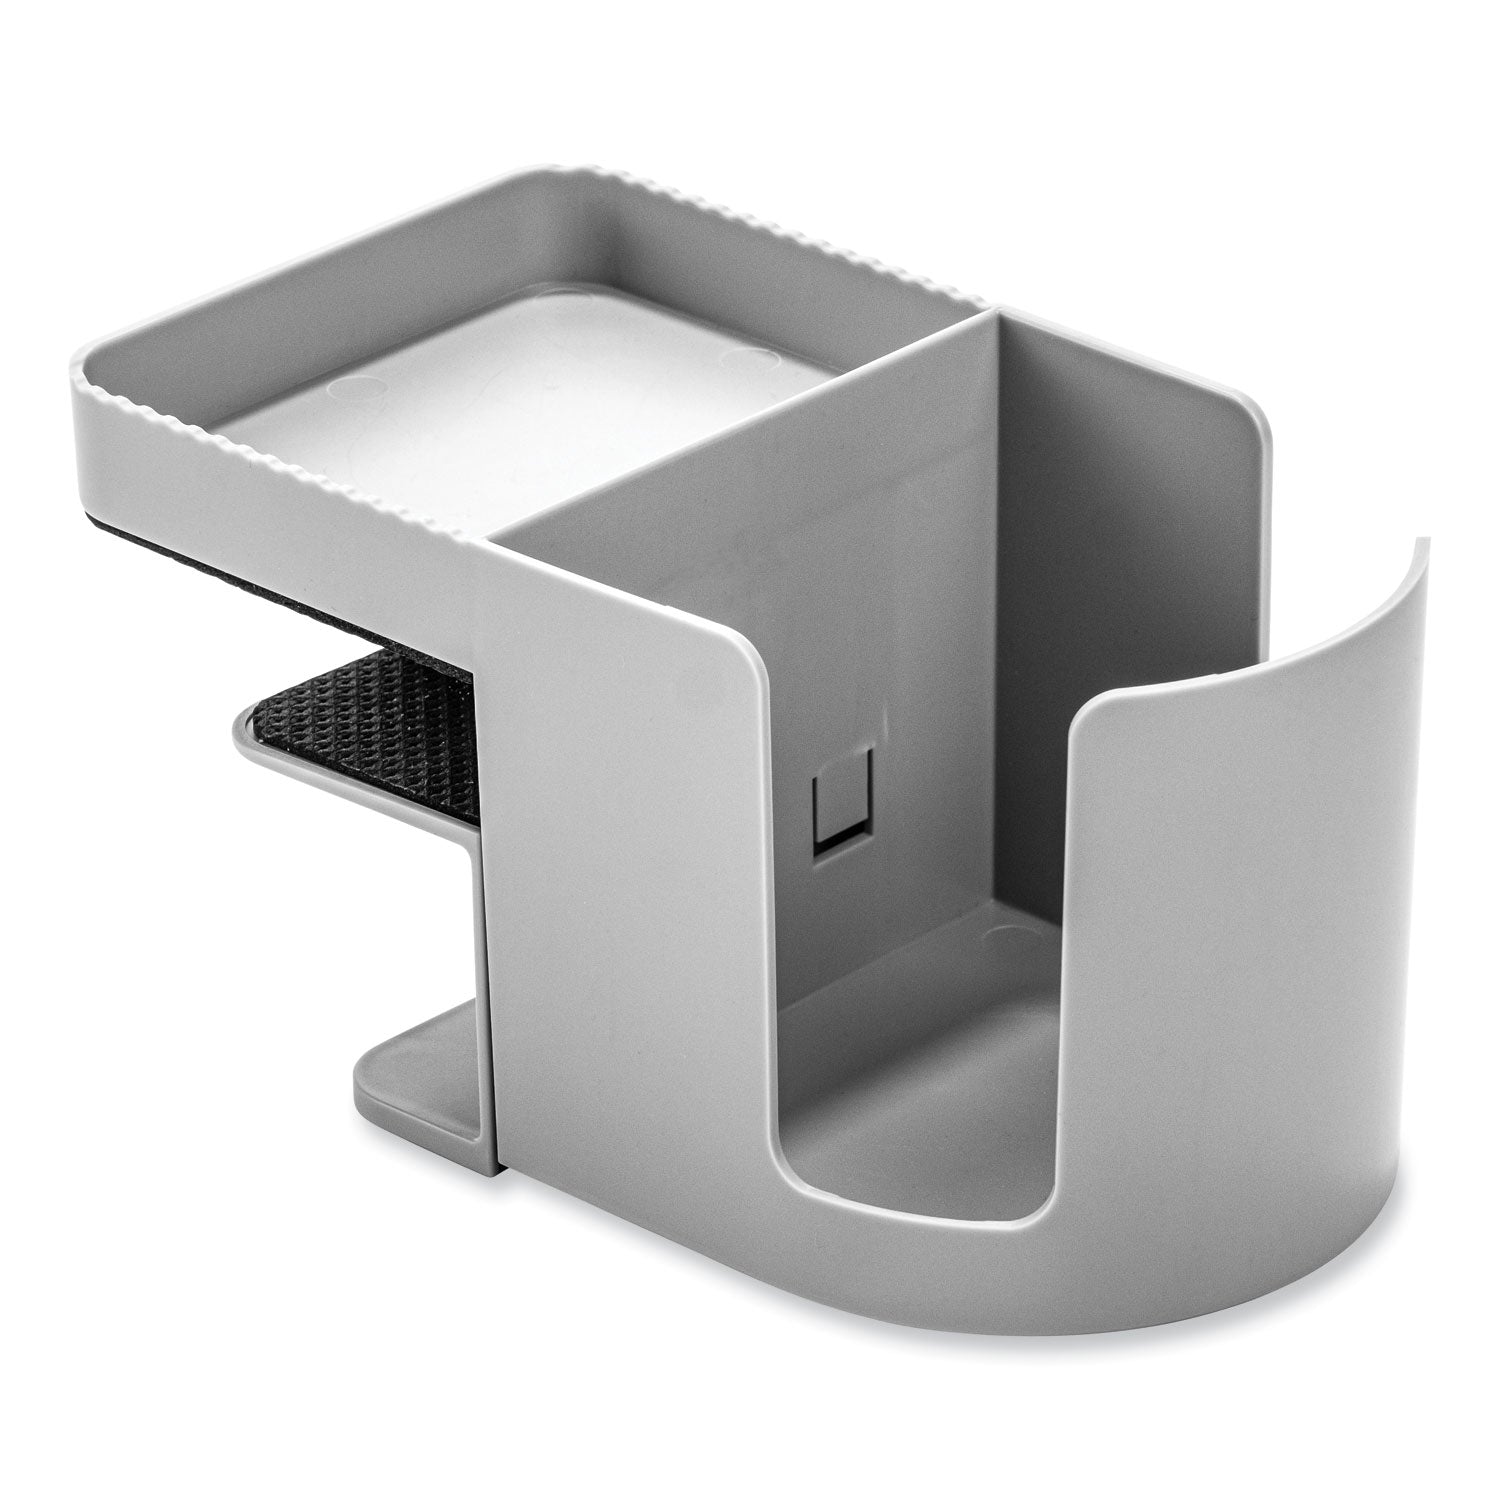 standing-desk-cup-holder-organizer-two-sections-394-x-704-x-354-gray_def400000 - 7